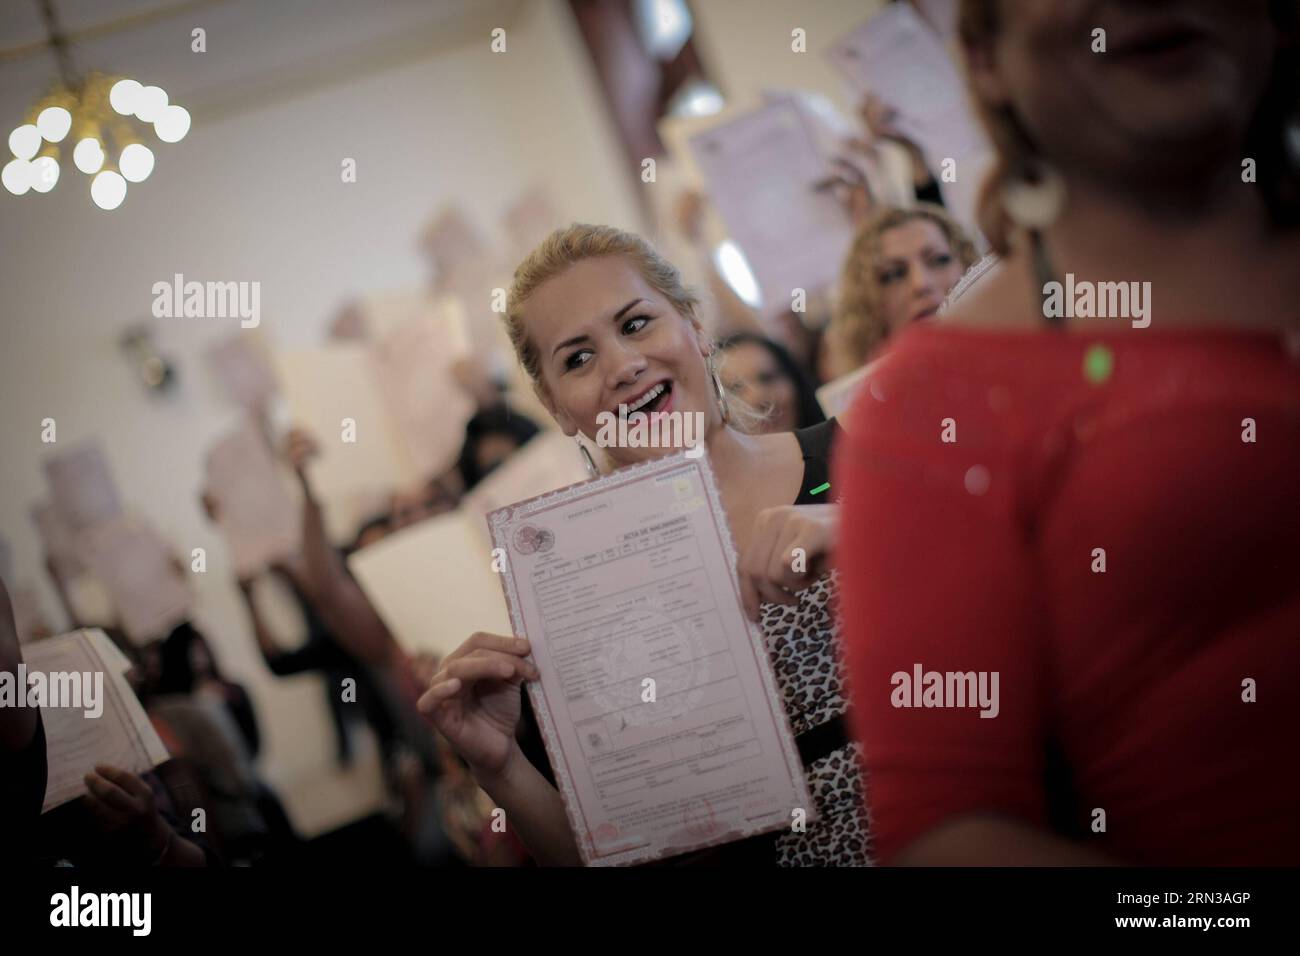 (150411) -- MEXICO CITY, April 11, 2015 -- Paulo Herrera reacts at the end of a handing over ceremony of birth certificates for transgendered people in the Legislative Assembly of Federal District (ALDF, for its acronym in Spanish), in Mexico City, capital of Mexico, on April 11, 2015. 31-year-old Paulo, a hair stylist living in Mexico City, received on Saturday the birth certificate that accredits him as Paula Herrera and female. Pedro Mera) (jp) MEXICO-MEXICO CITY-SOCIETY-TRANSGENDER-BIRTH CERTIFICATE e PedroxMera PUBLICATIONxNOTxINxCHN   Mexico City April 11 2015 Paulo Herrera reacts AT The Stock Photo